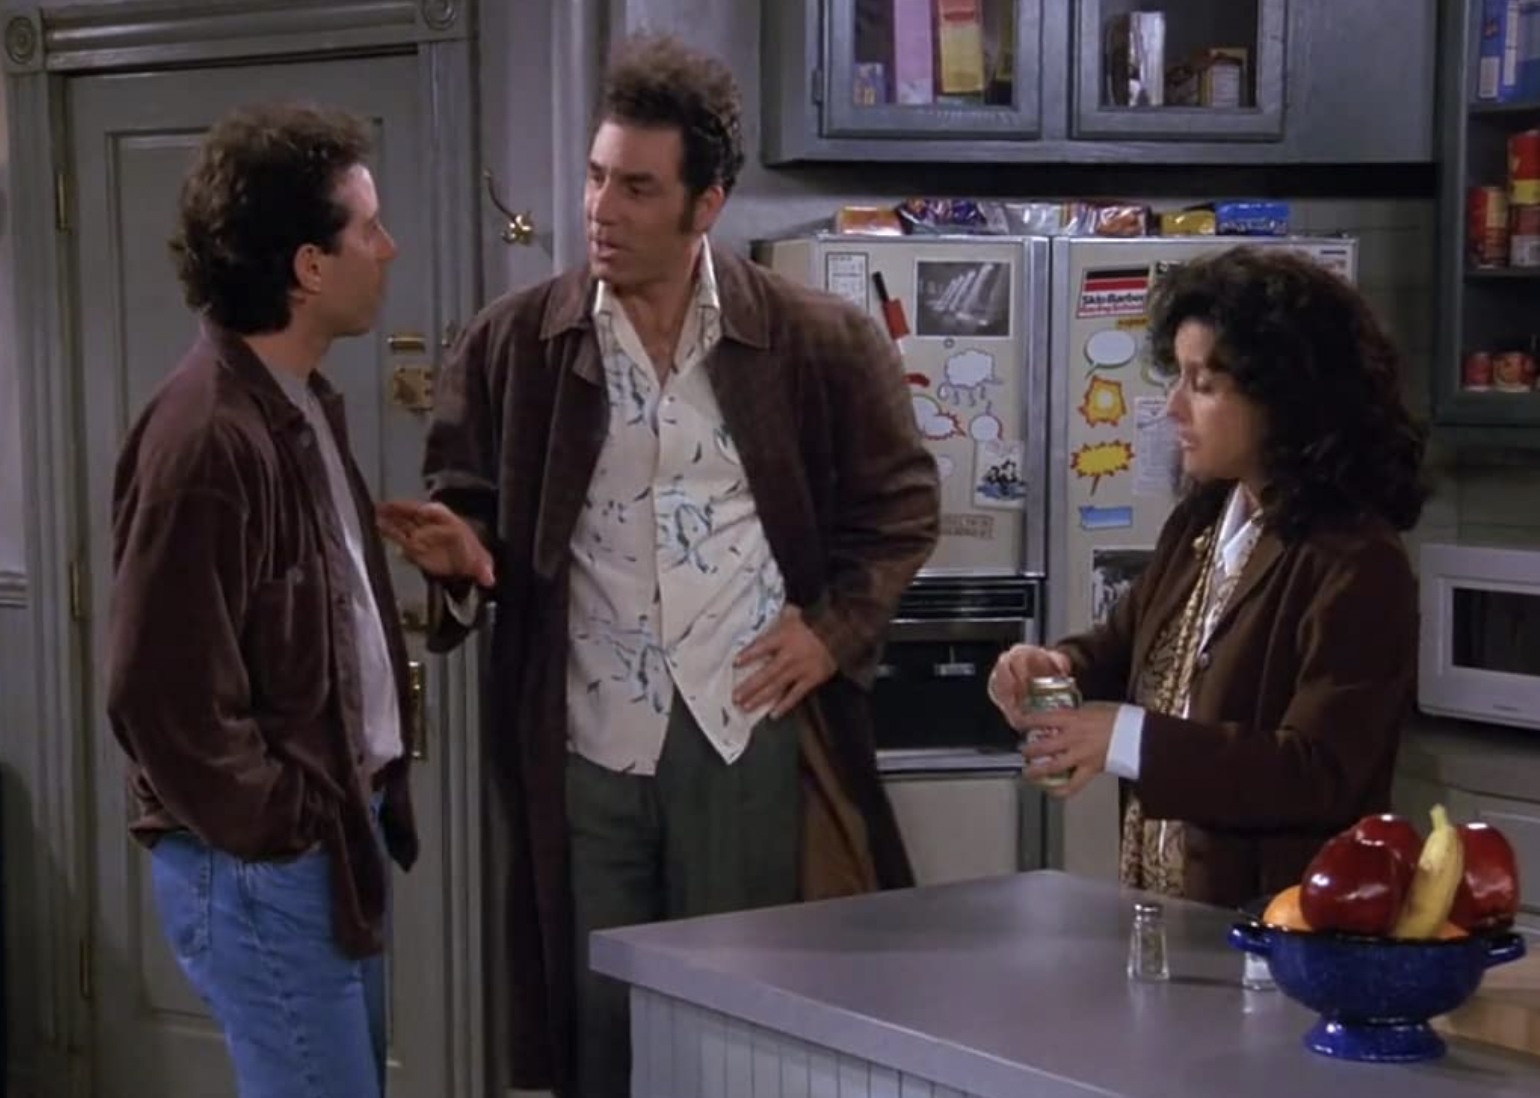 Julia Louis-Dreyfus, Jerry Seinfeld, and Michael Richards in "Seinfeld."